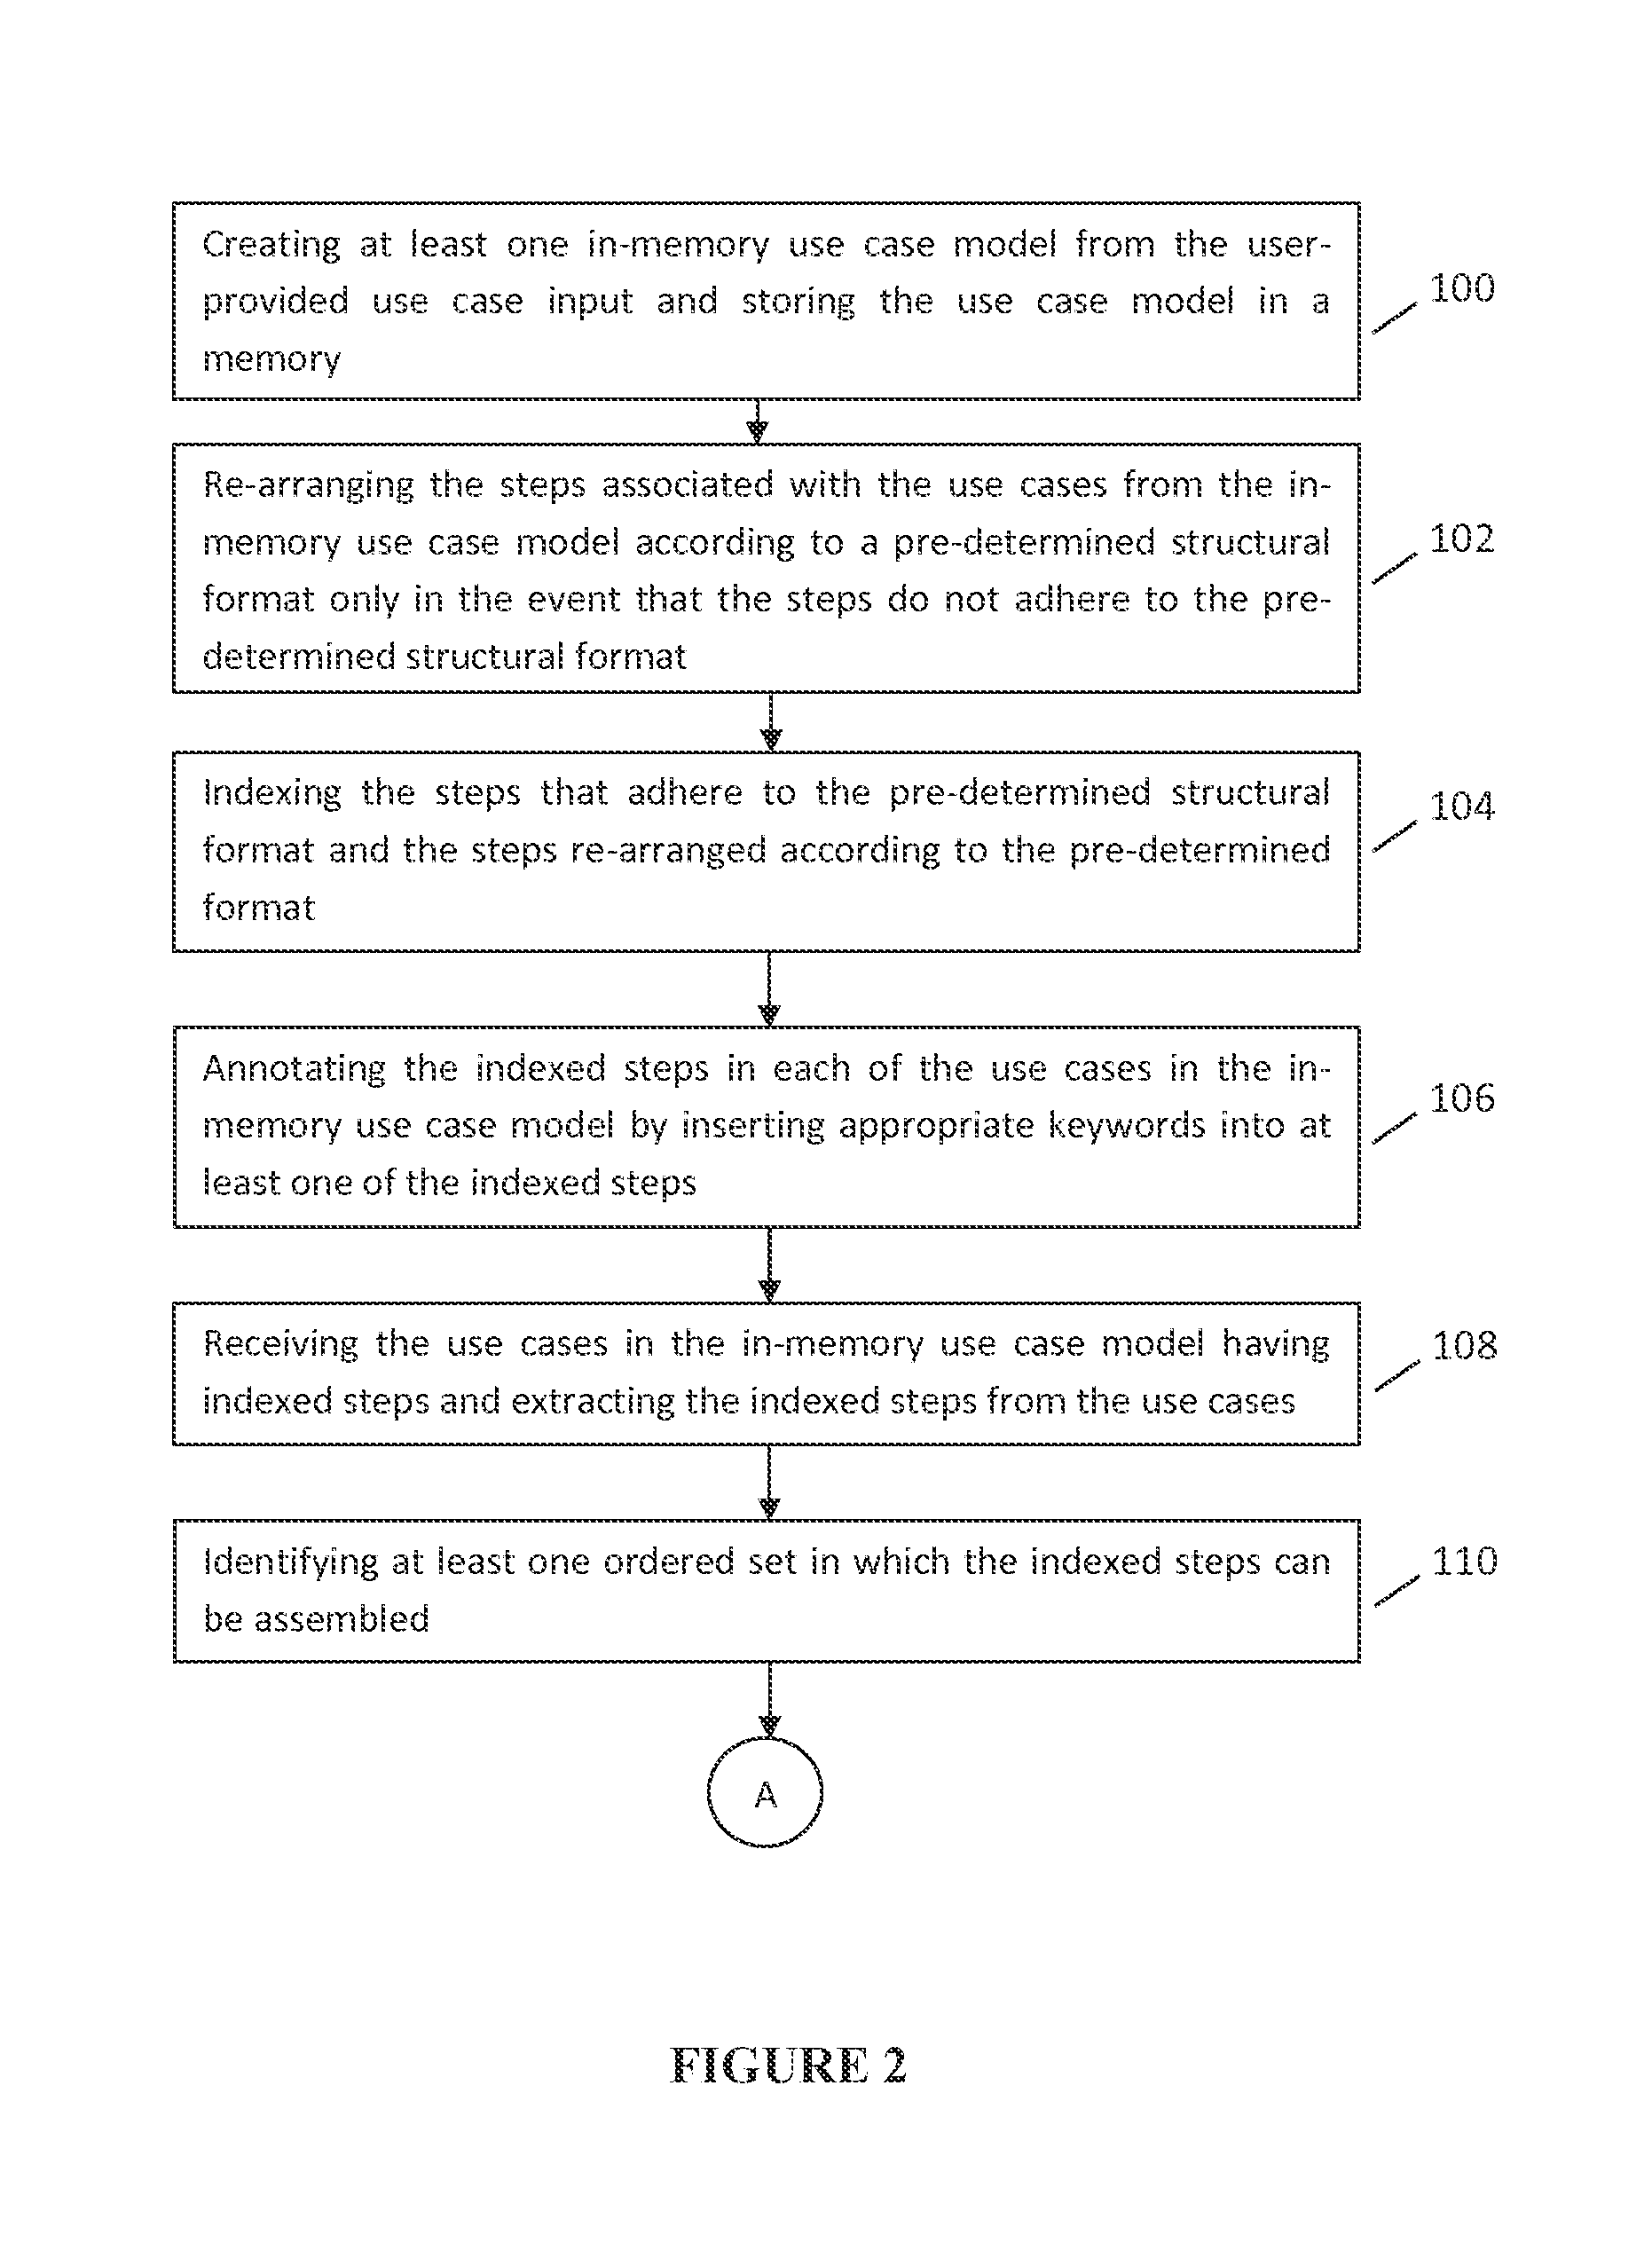 Computer implemented system and method for indexing and annotating use cases and generating test scenarios therefrom